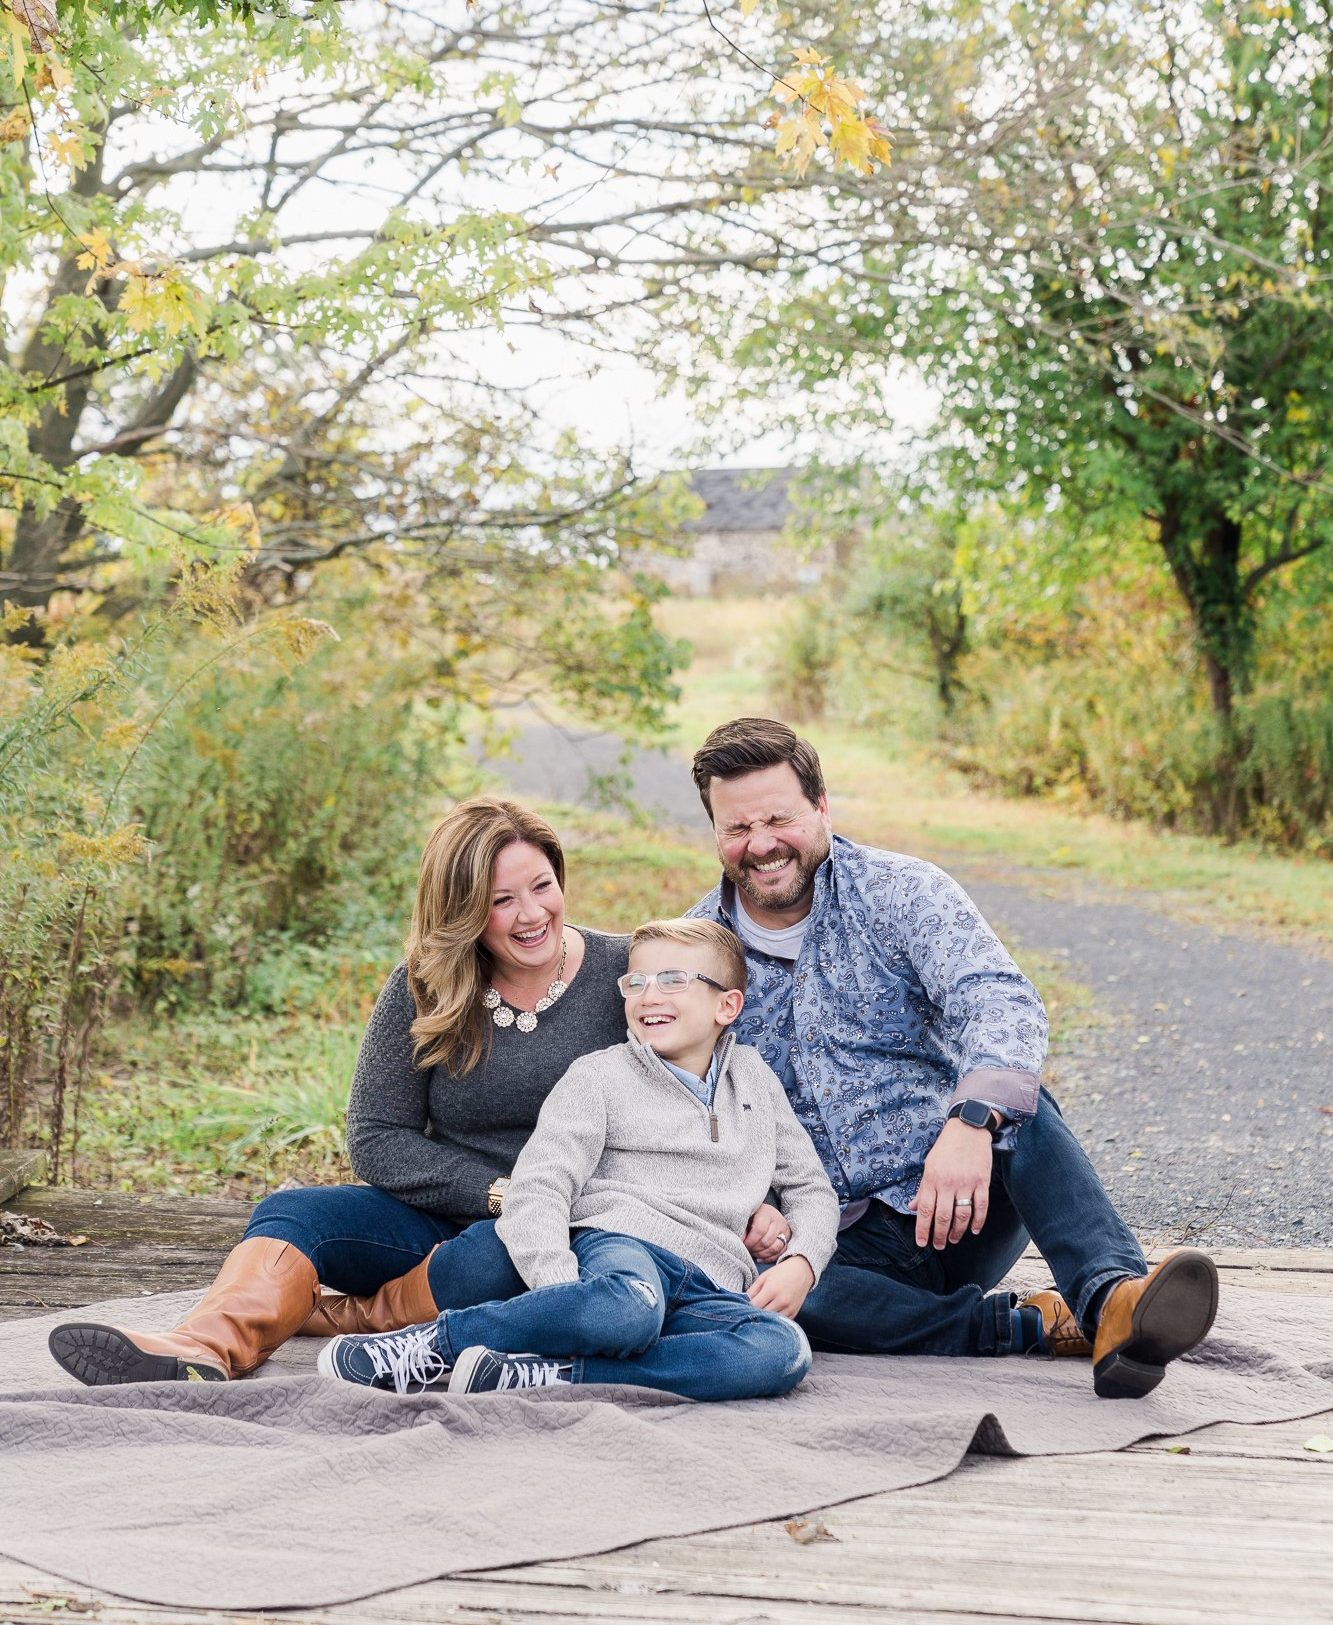 A fall family photoshoot at Swedes Run Park in Moorestown, NJ.